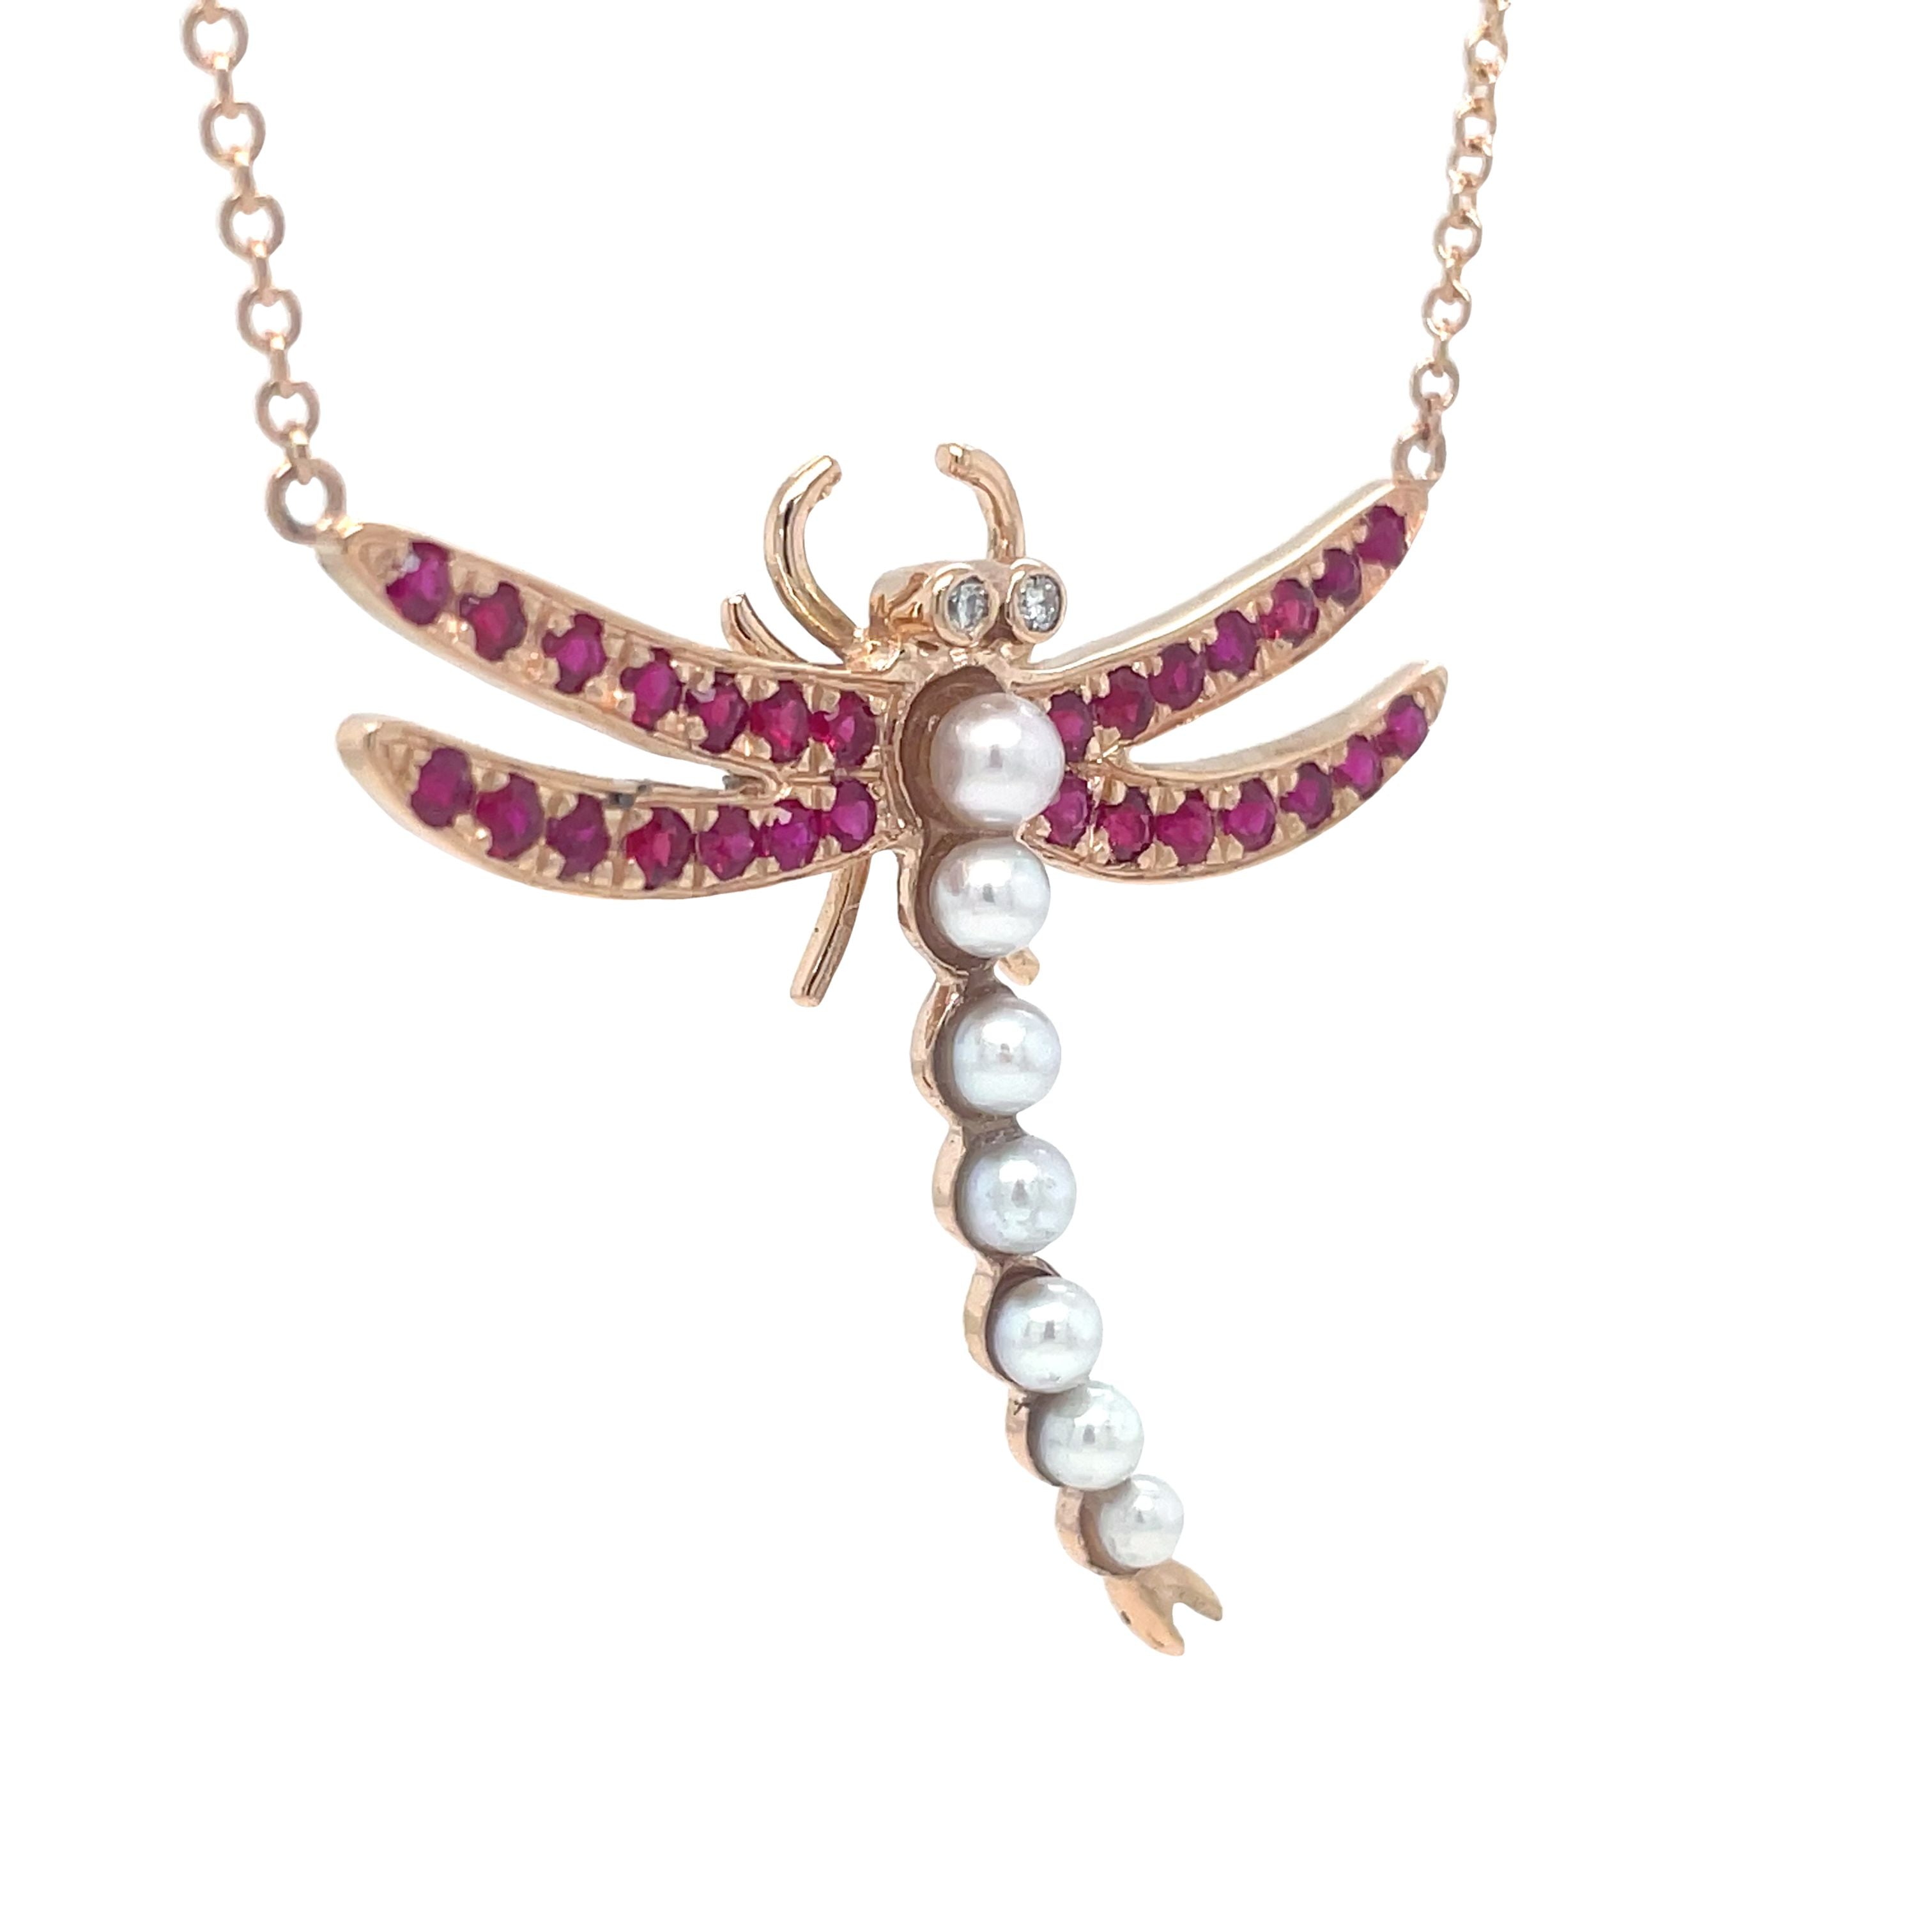 This one-of-a-kind custom made dragonfly pendant necklace is crafted with custom 18k rose gold and adorned with a stunning dragonfly pendant and 7 cultured pearls. The round rubies add a touch of elegance to this 18-inch rose gold necklace. Elevate any outfit with this unique and luxurious piece!